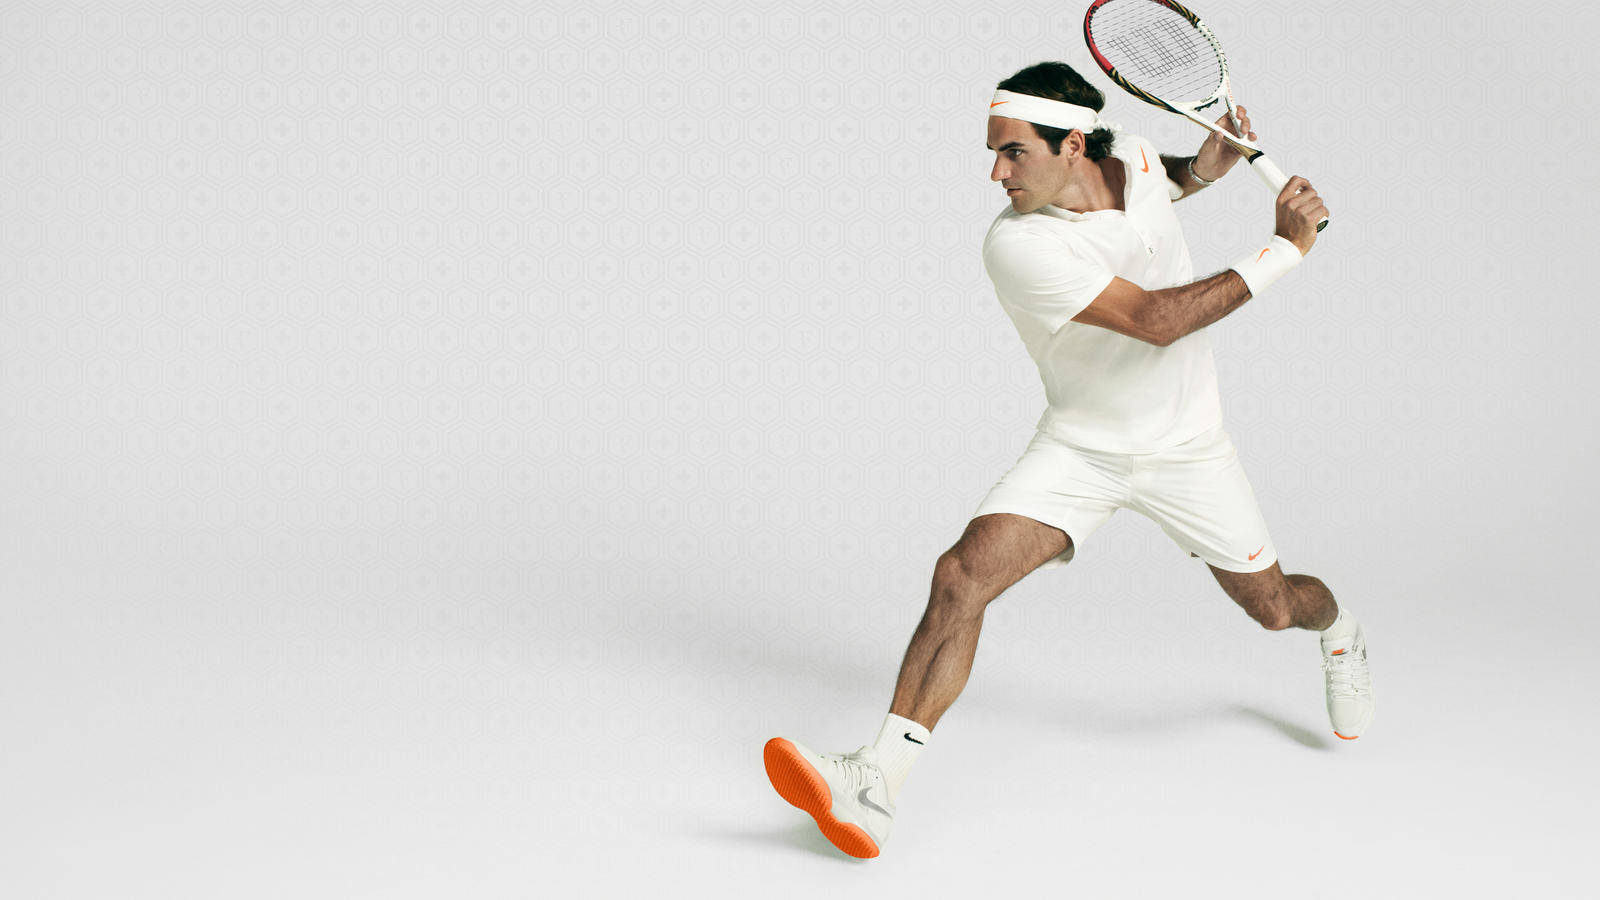 Roger Federer Showcasing His Agility On The Tennis Court.